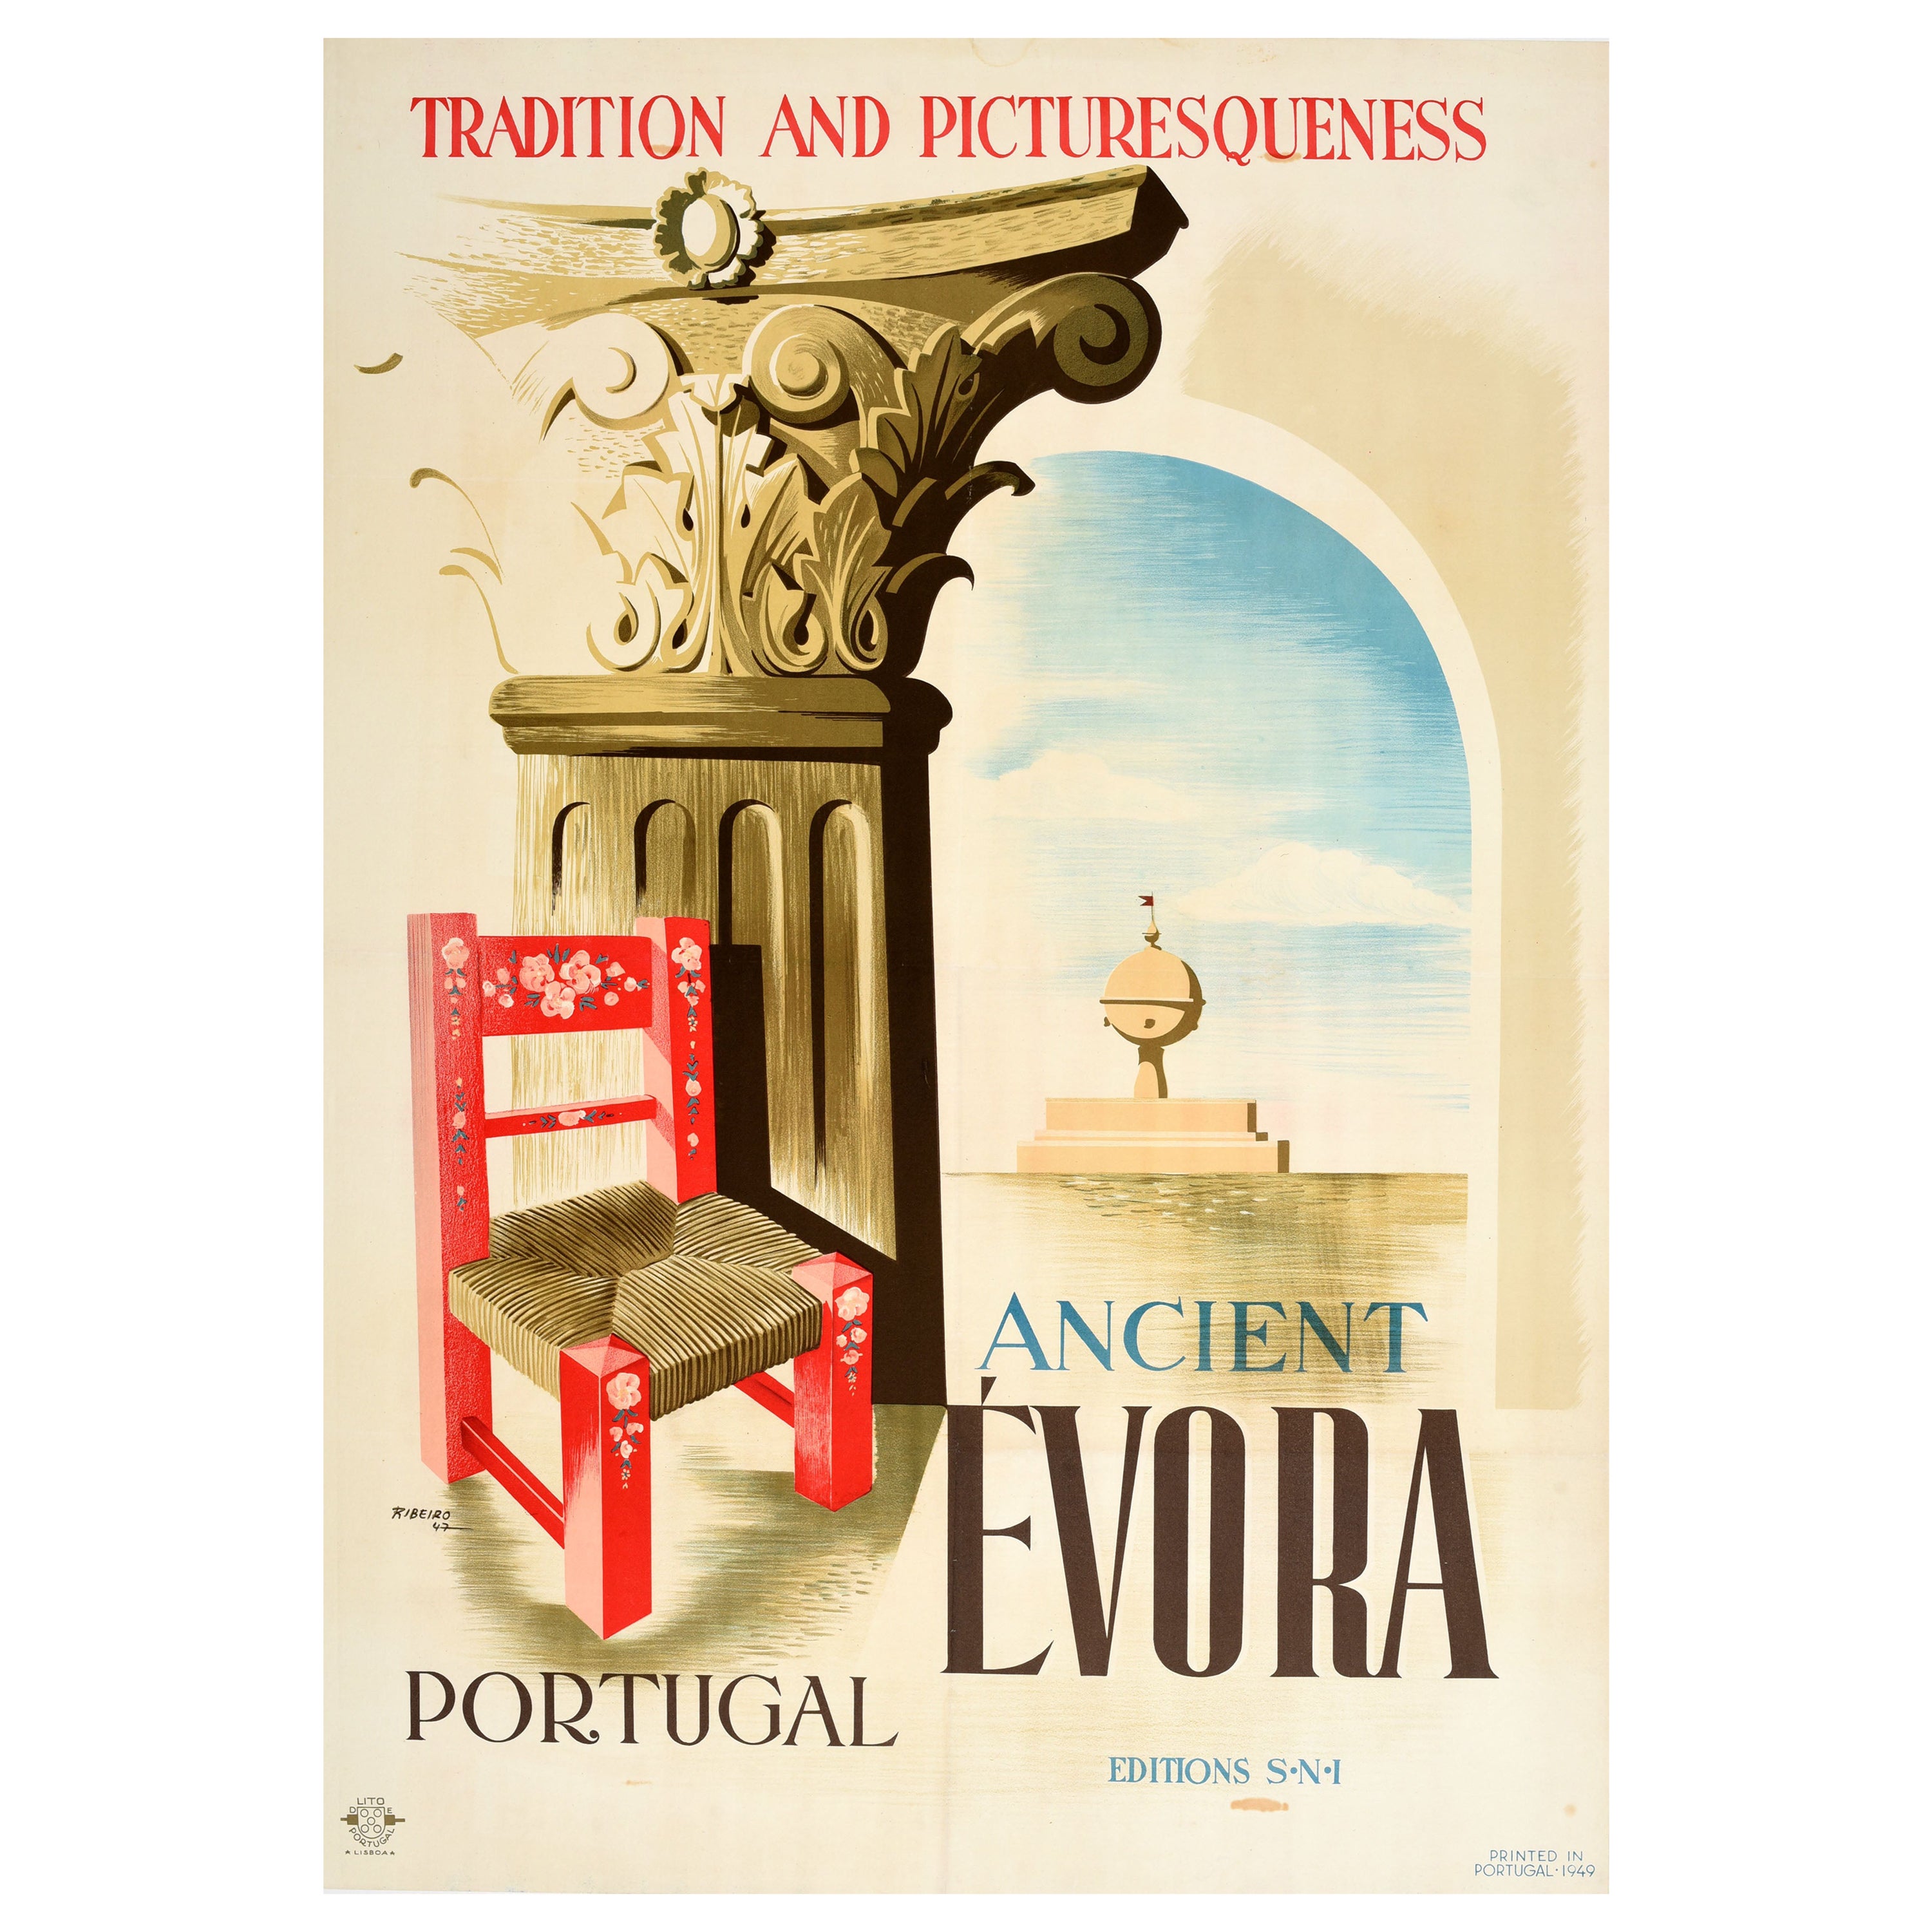 Original Vintage Travel Poster Ancient Evora Portugal Tradition Picturesqueness For Sale